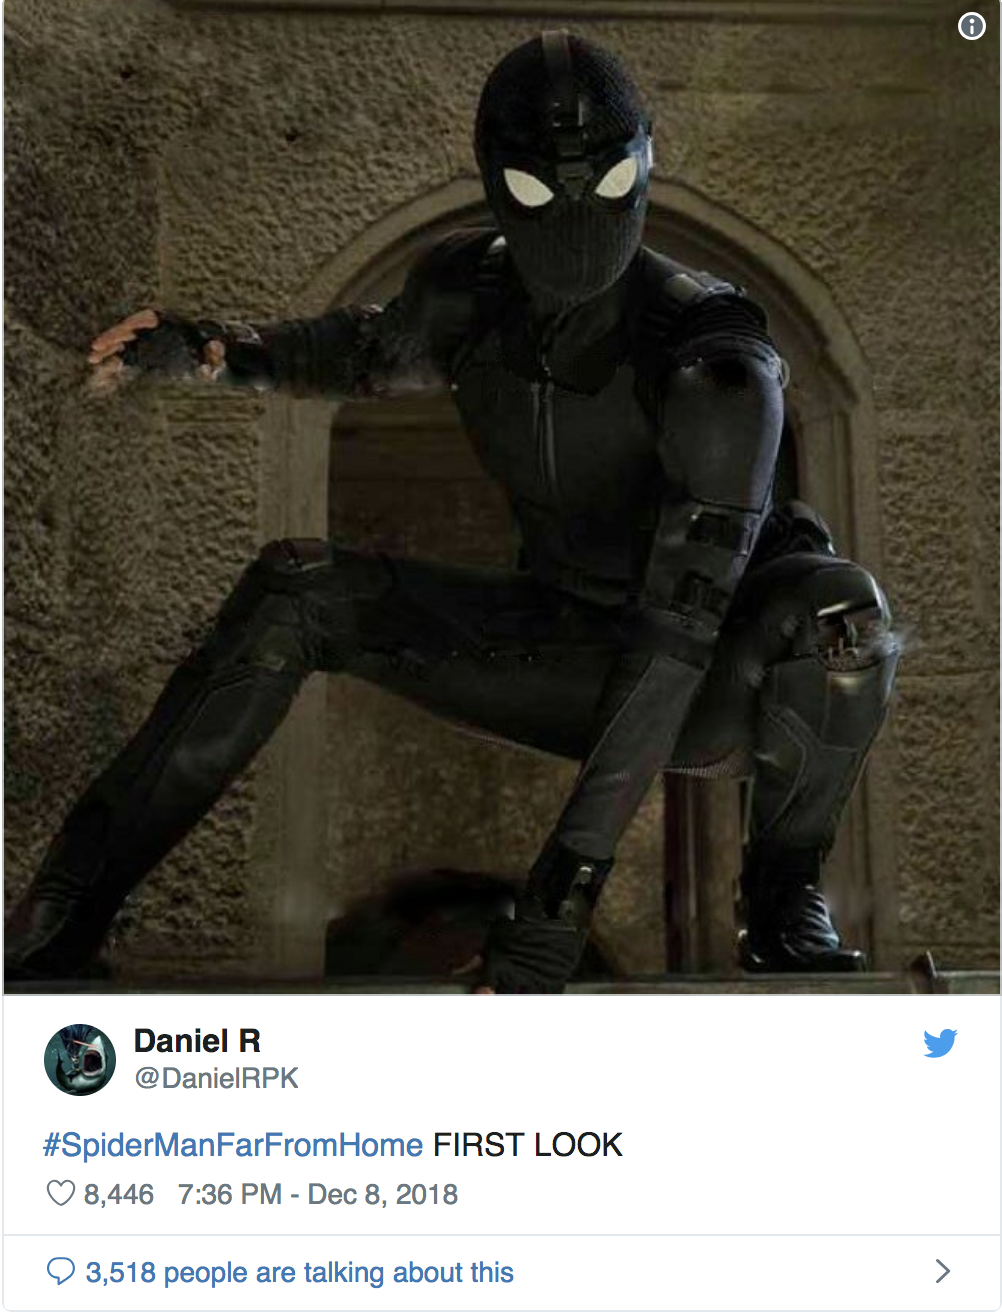 Spider-Man: Far From Home Stealth Suit revealed at Brazil Comic Con